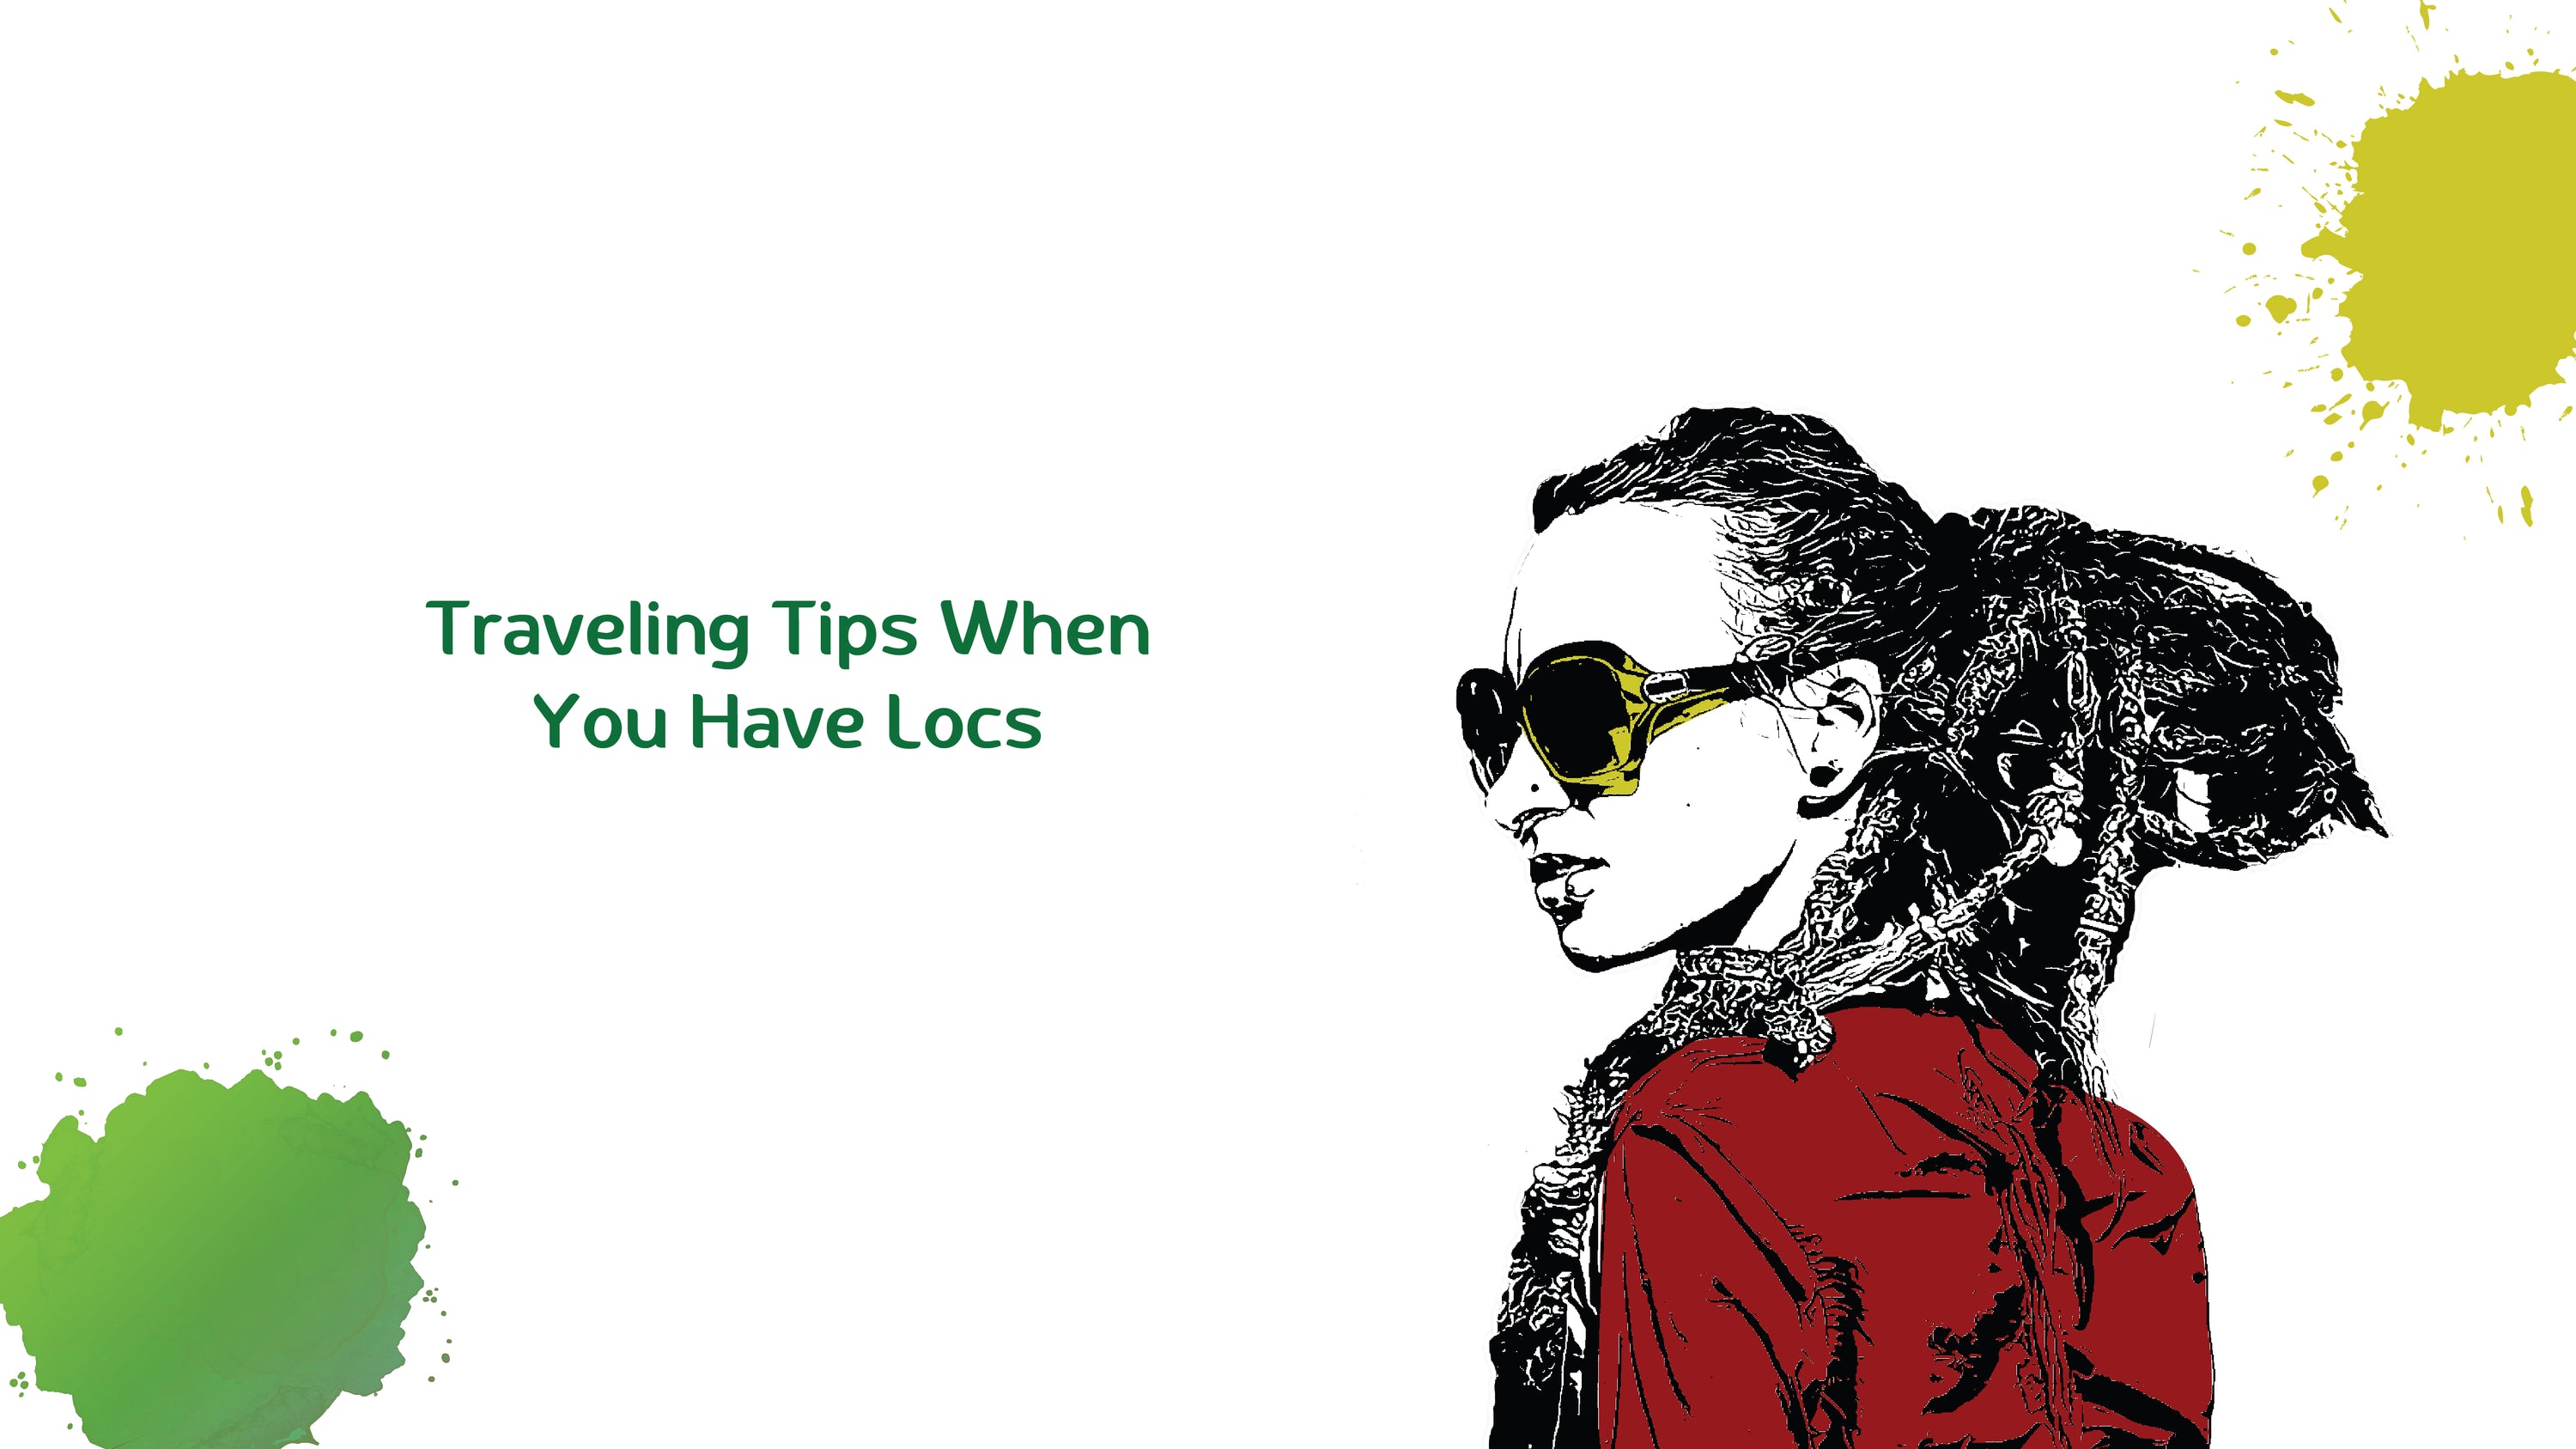 Traveling Tips When You Have Locs